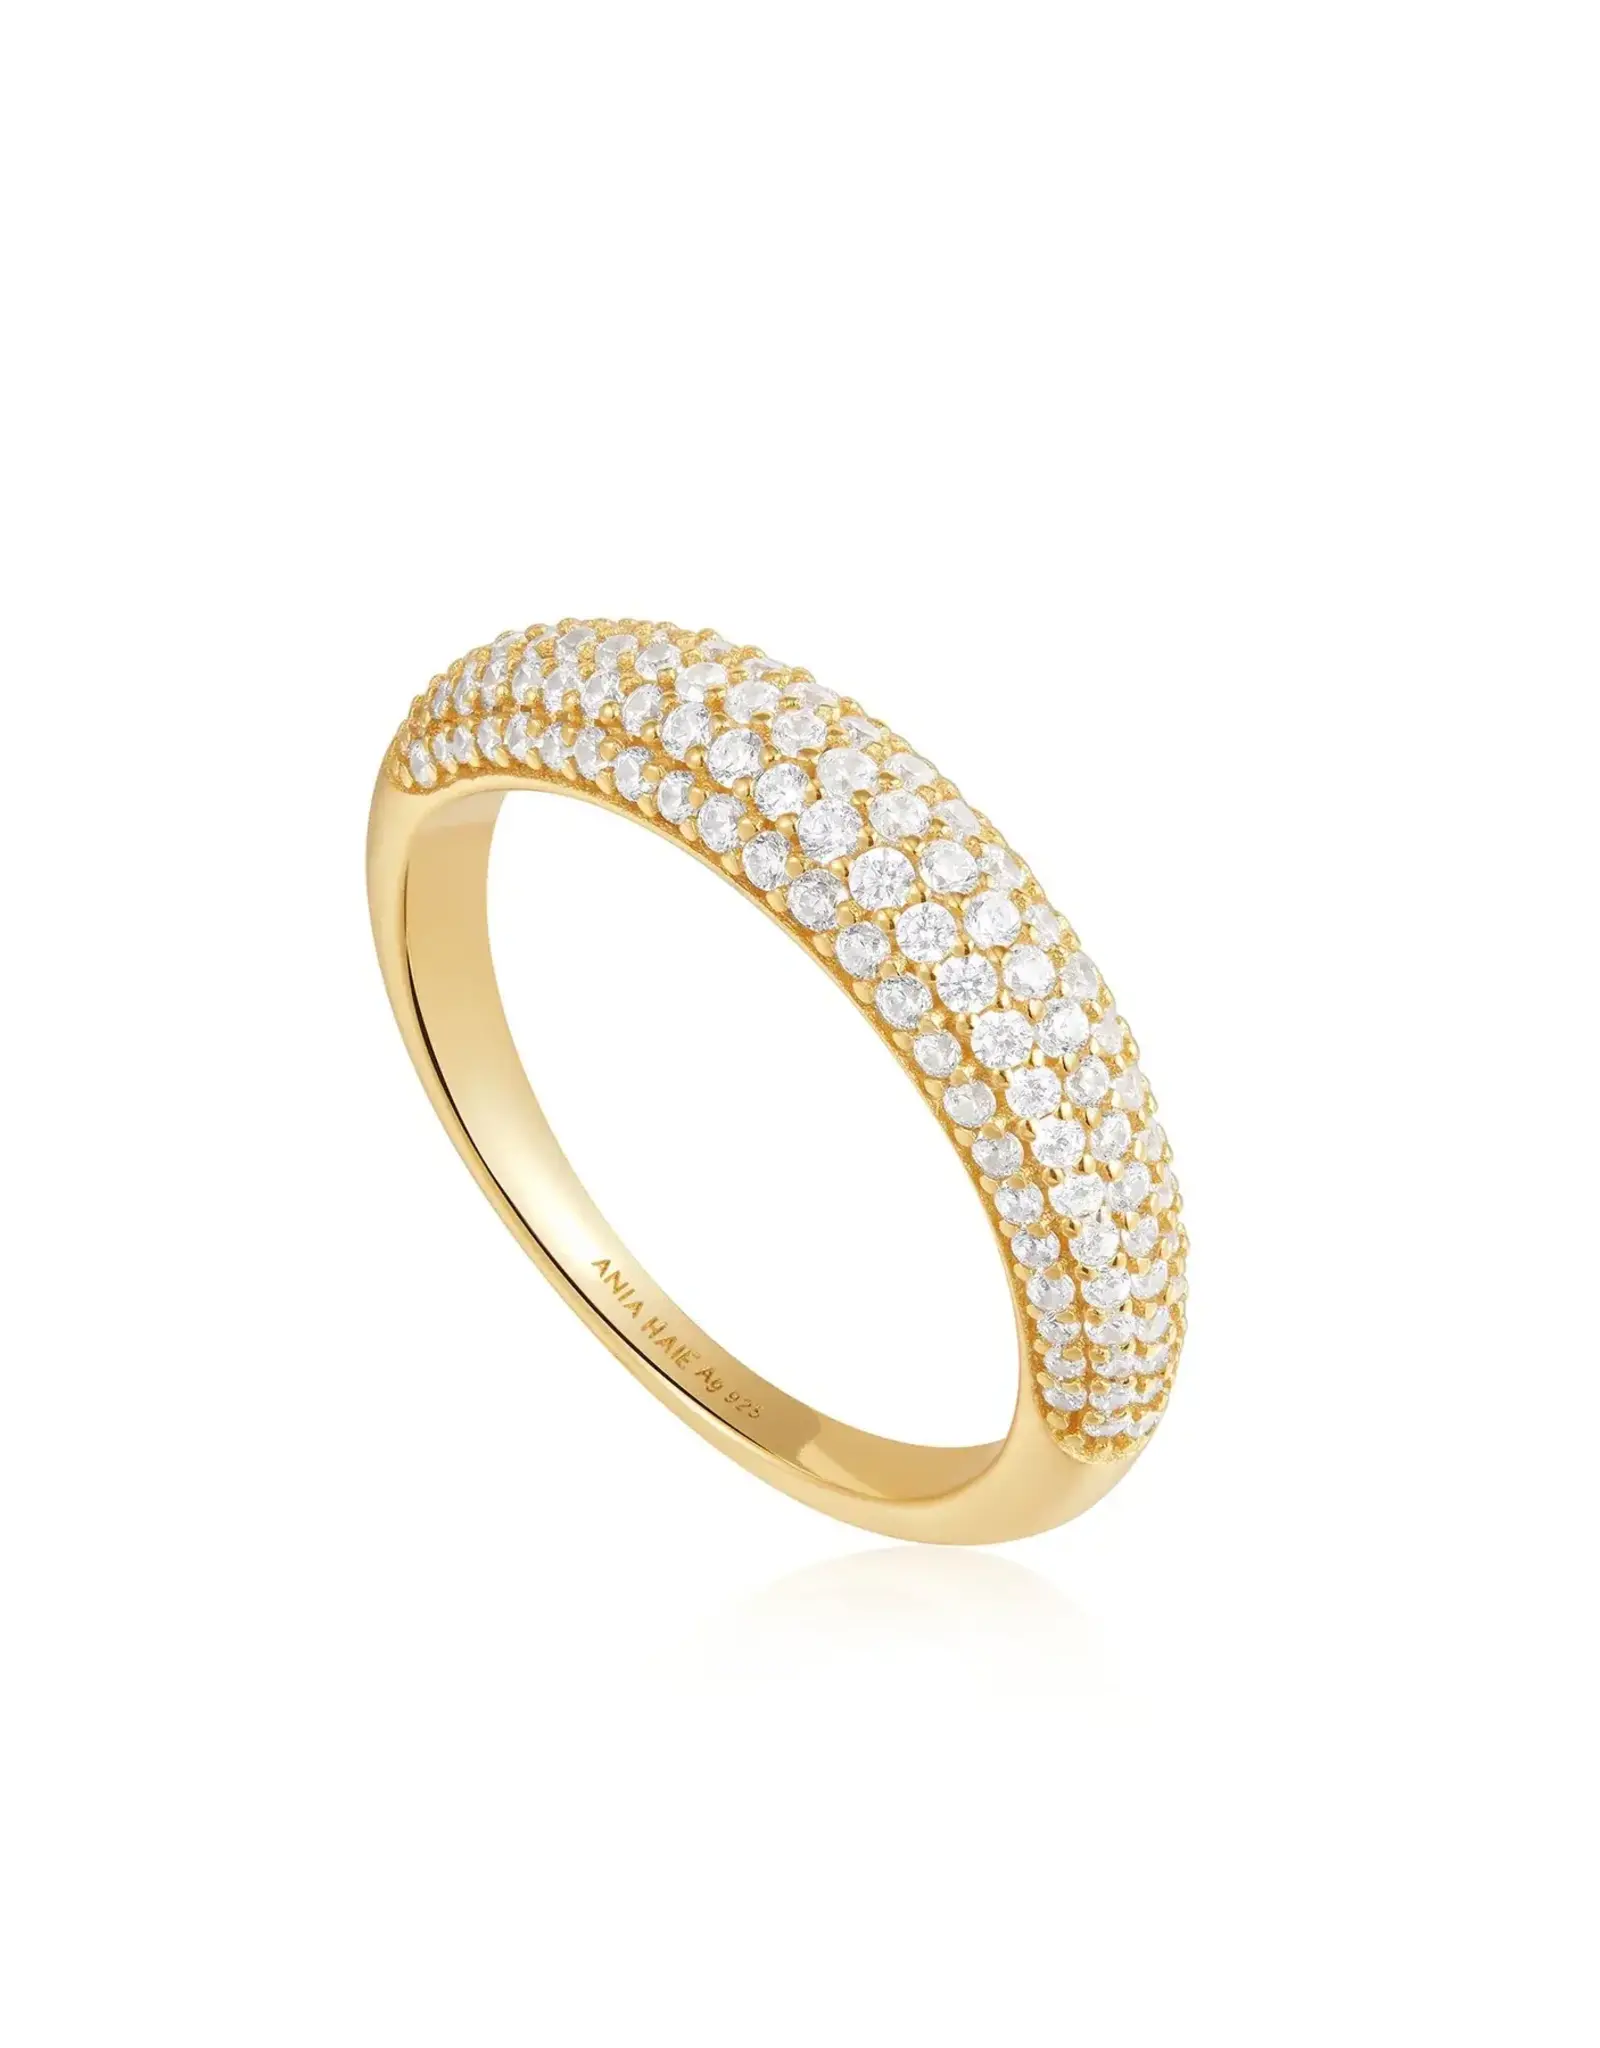 Ania Haie Ania haie - Ring gold pave dome M58